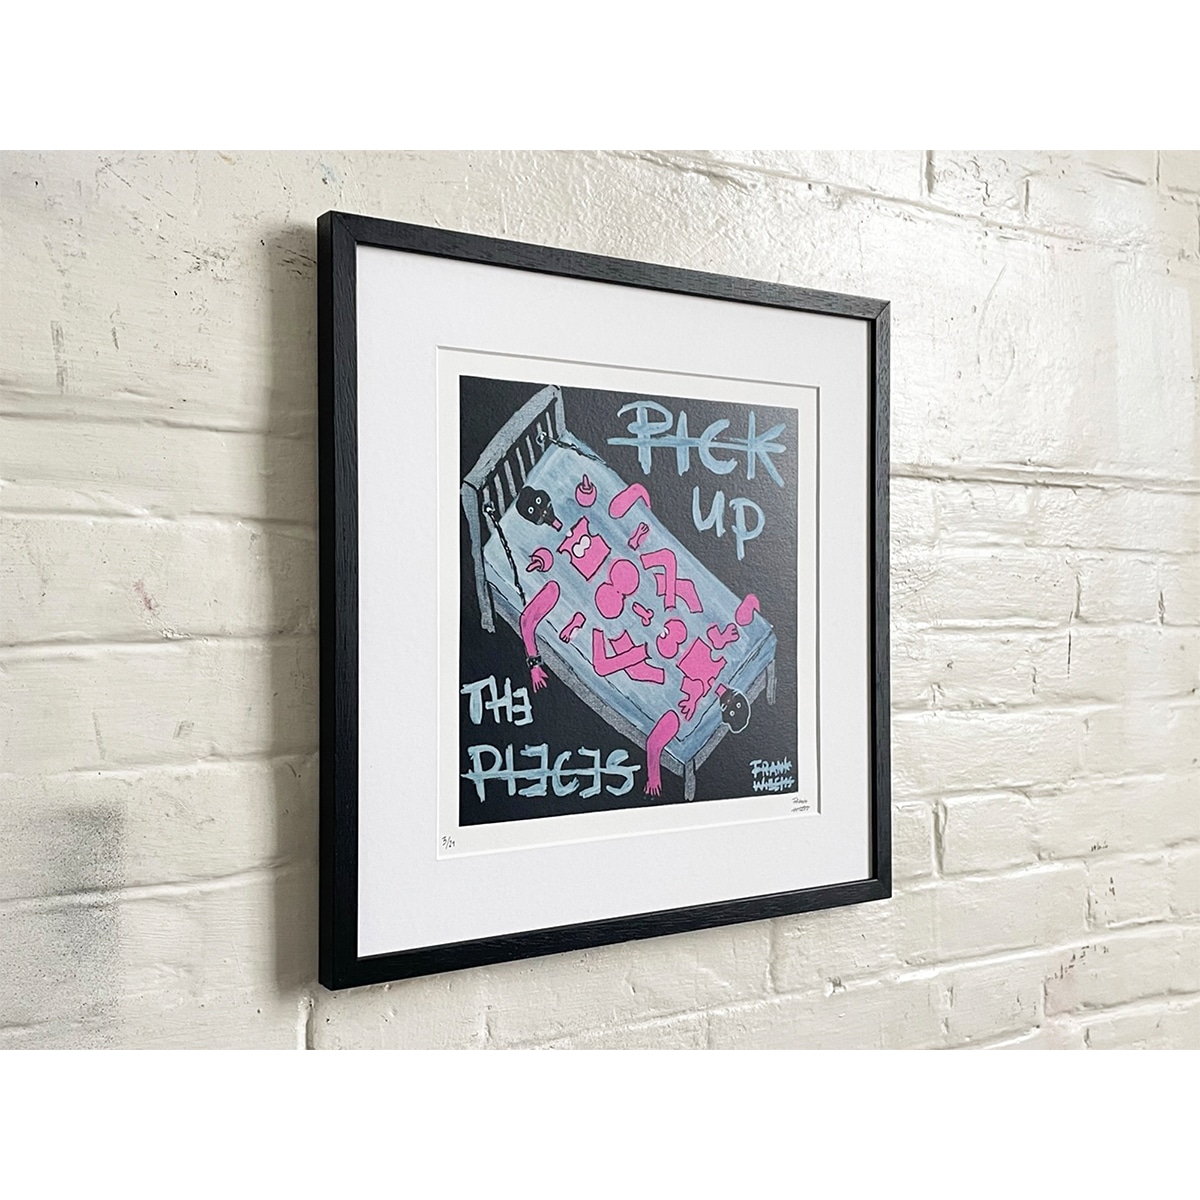 Limited Edt. Art Print – PICK UP THE PIECES